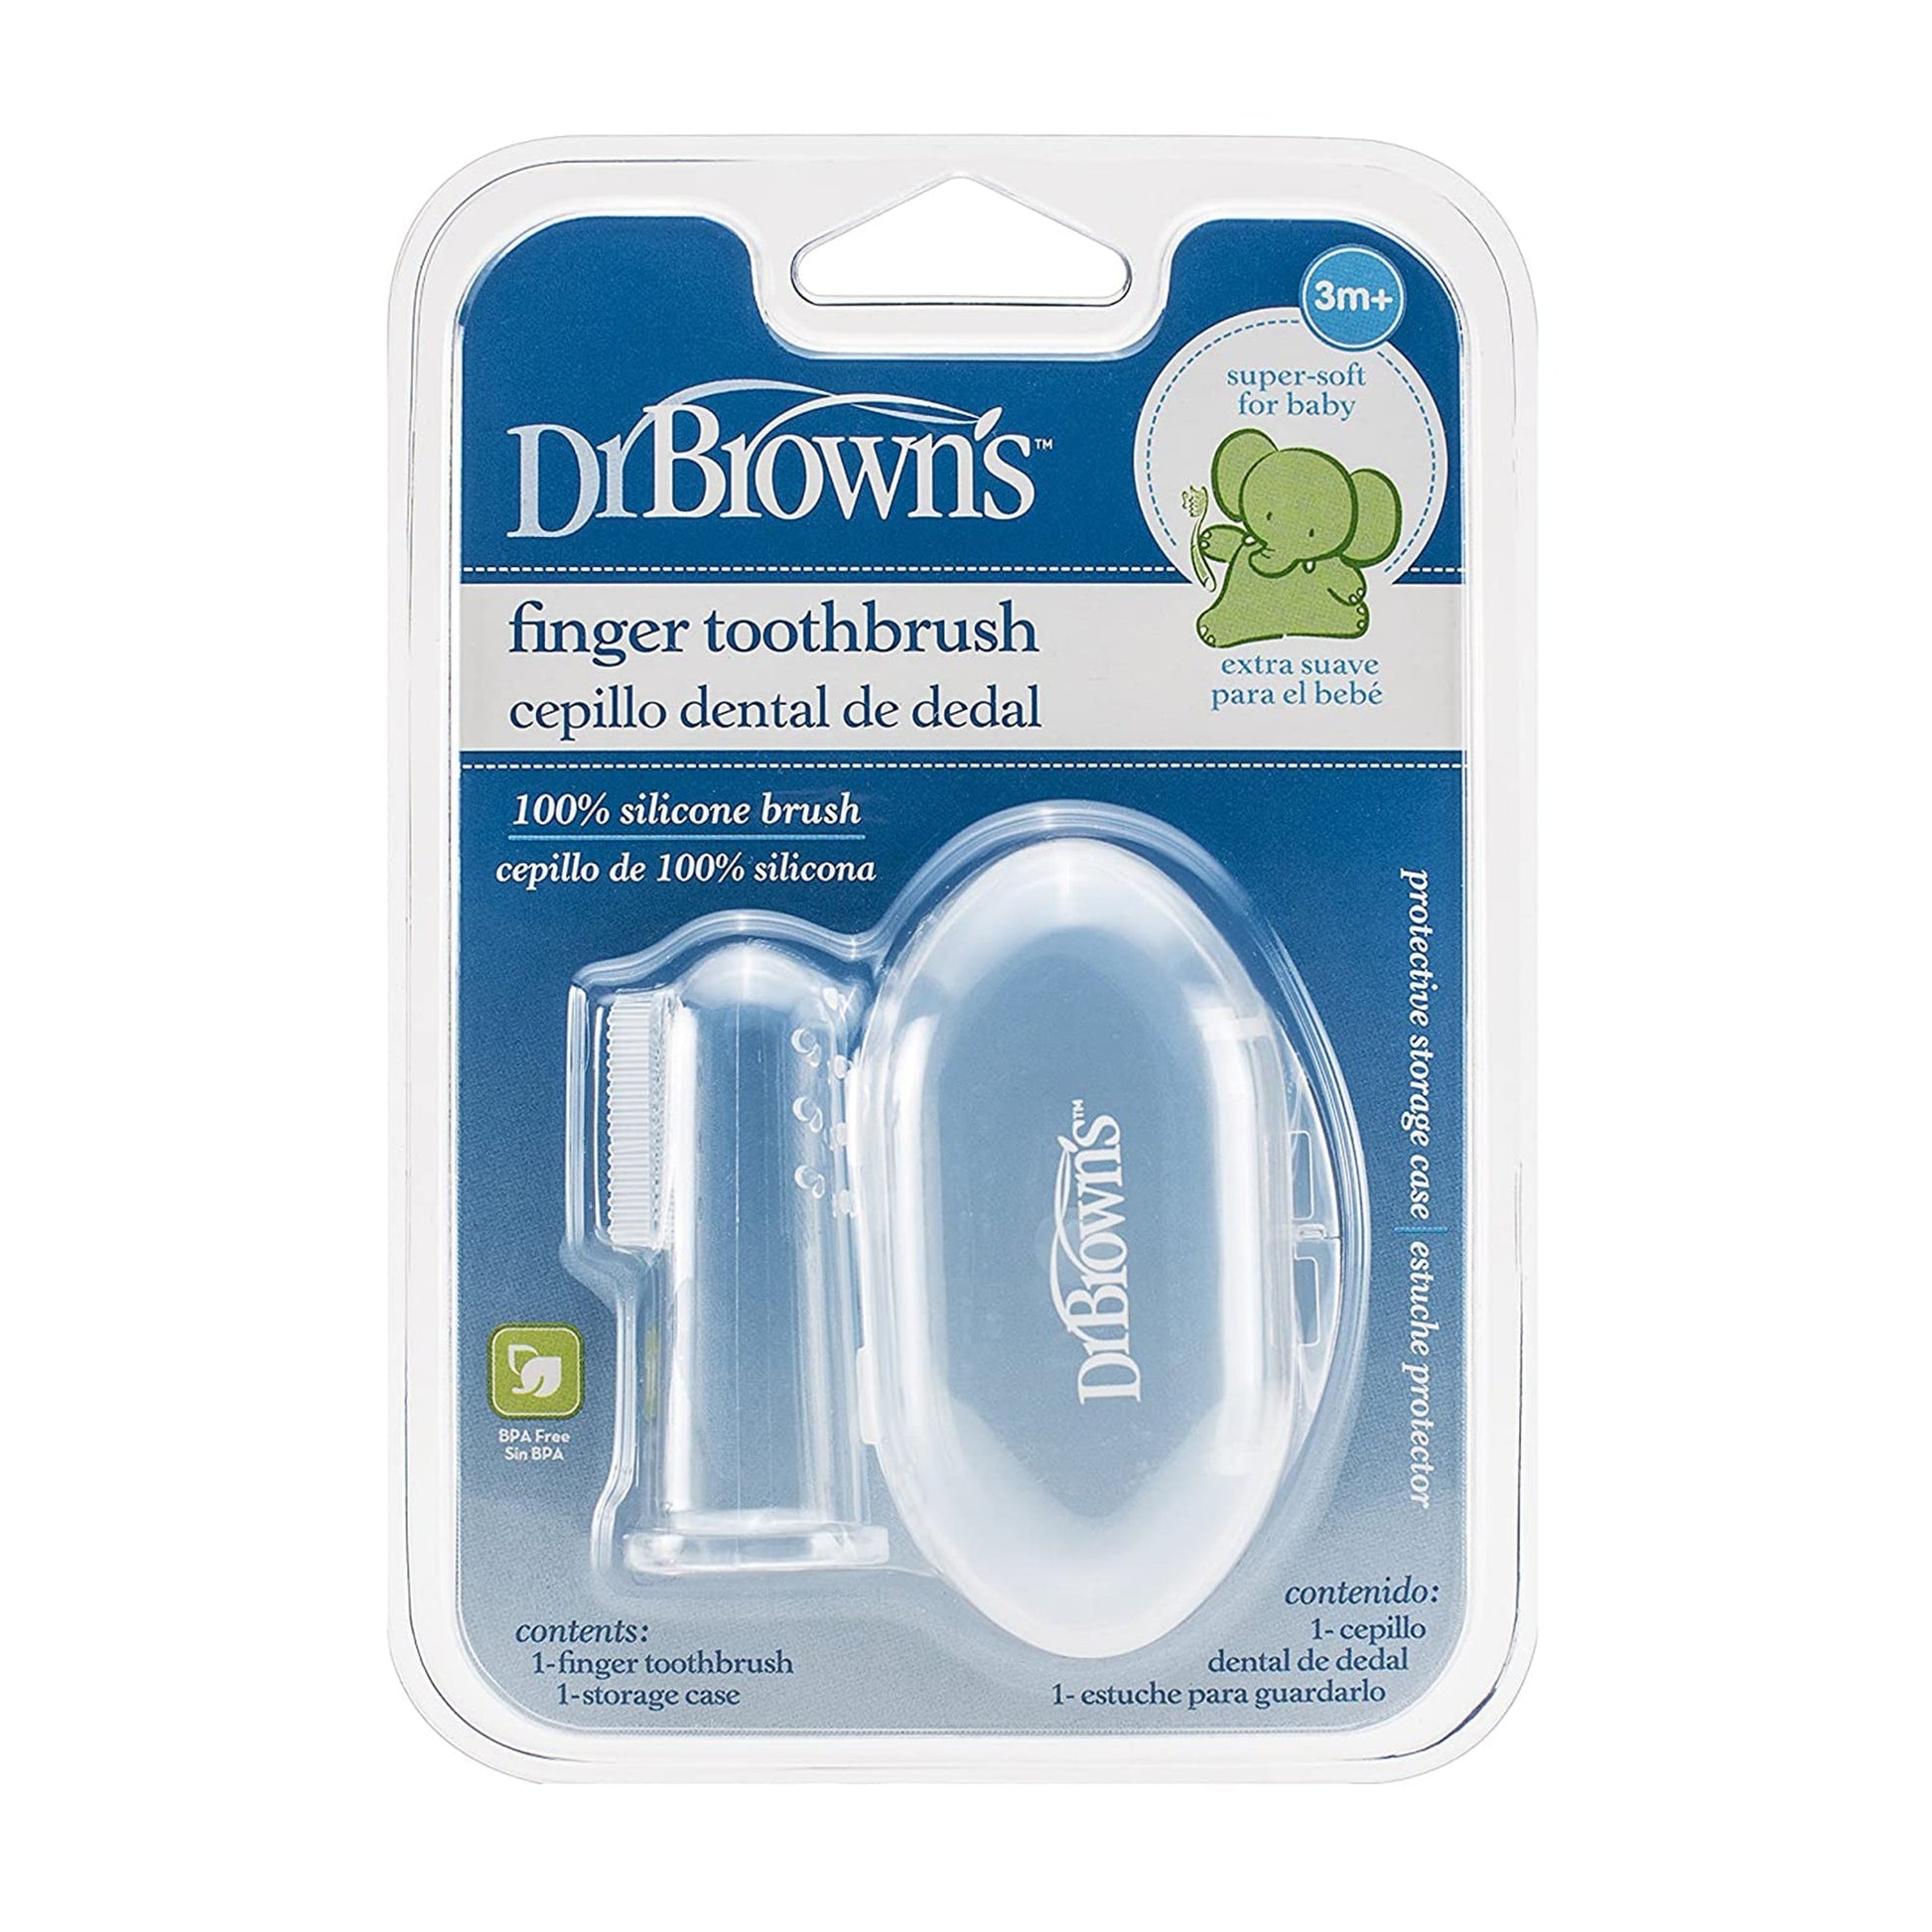 Dr. Brown Silicone Finger Toothbrush with case || Used for 3months to 12months - Toys4All.in